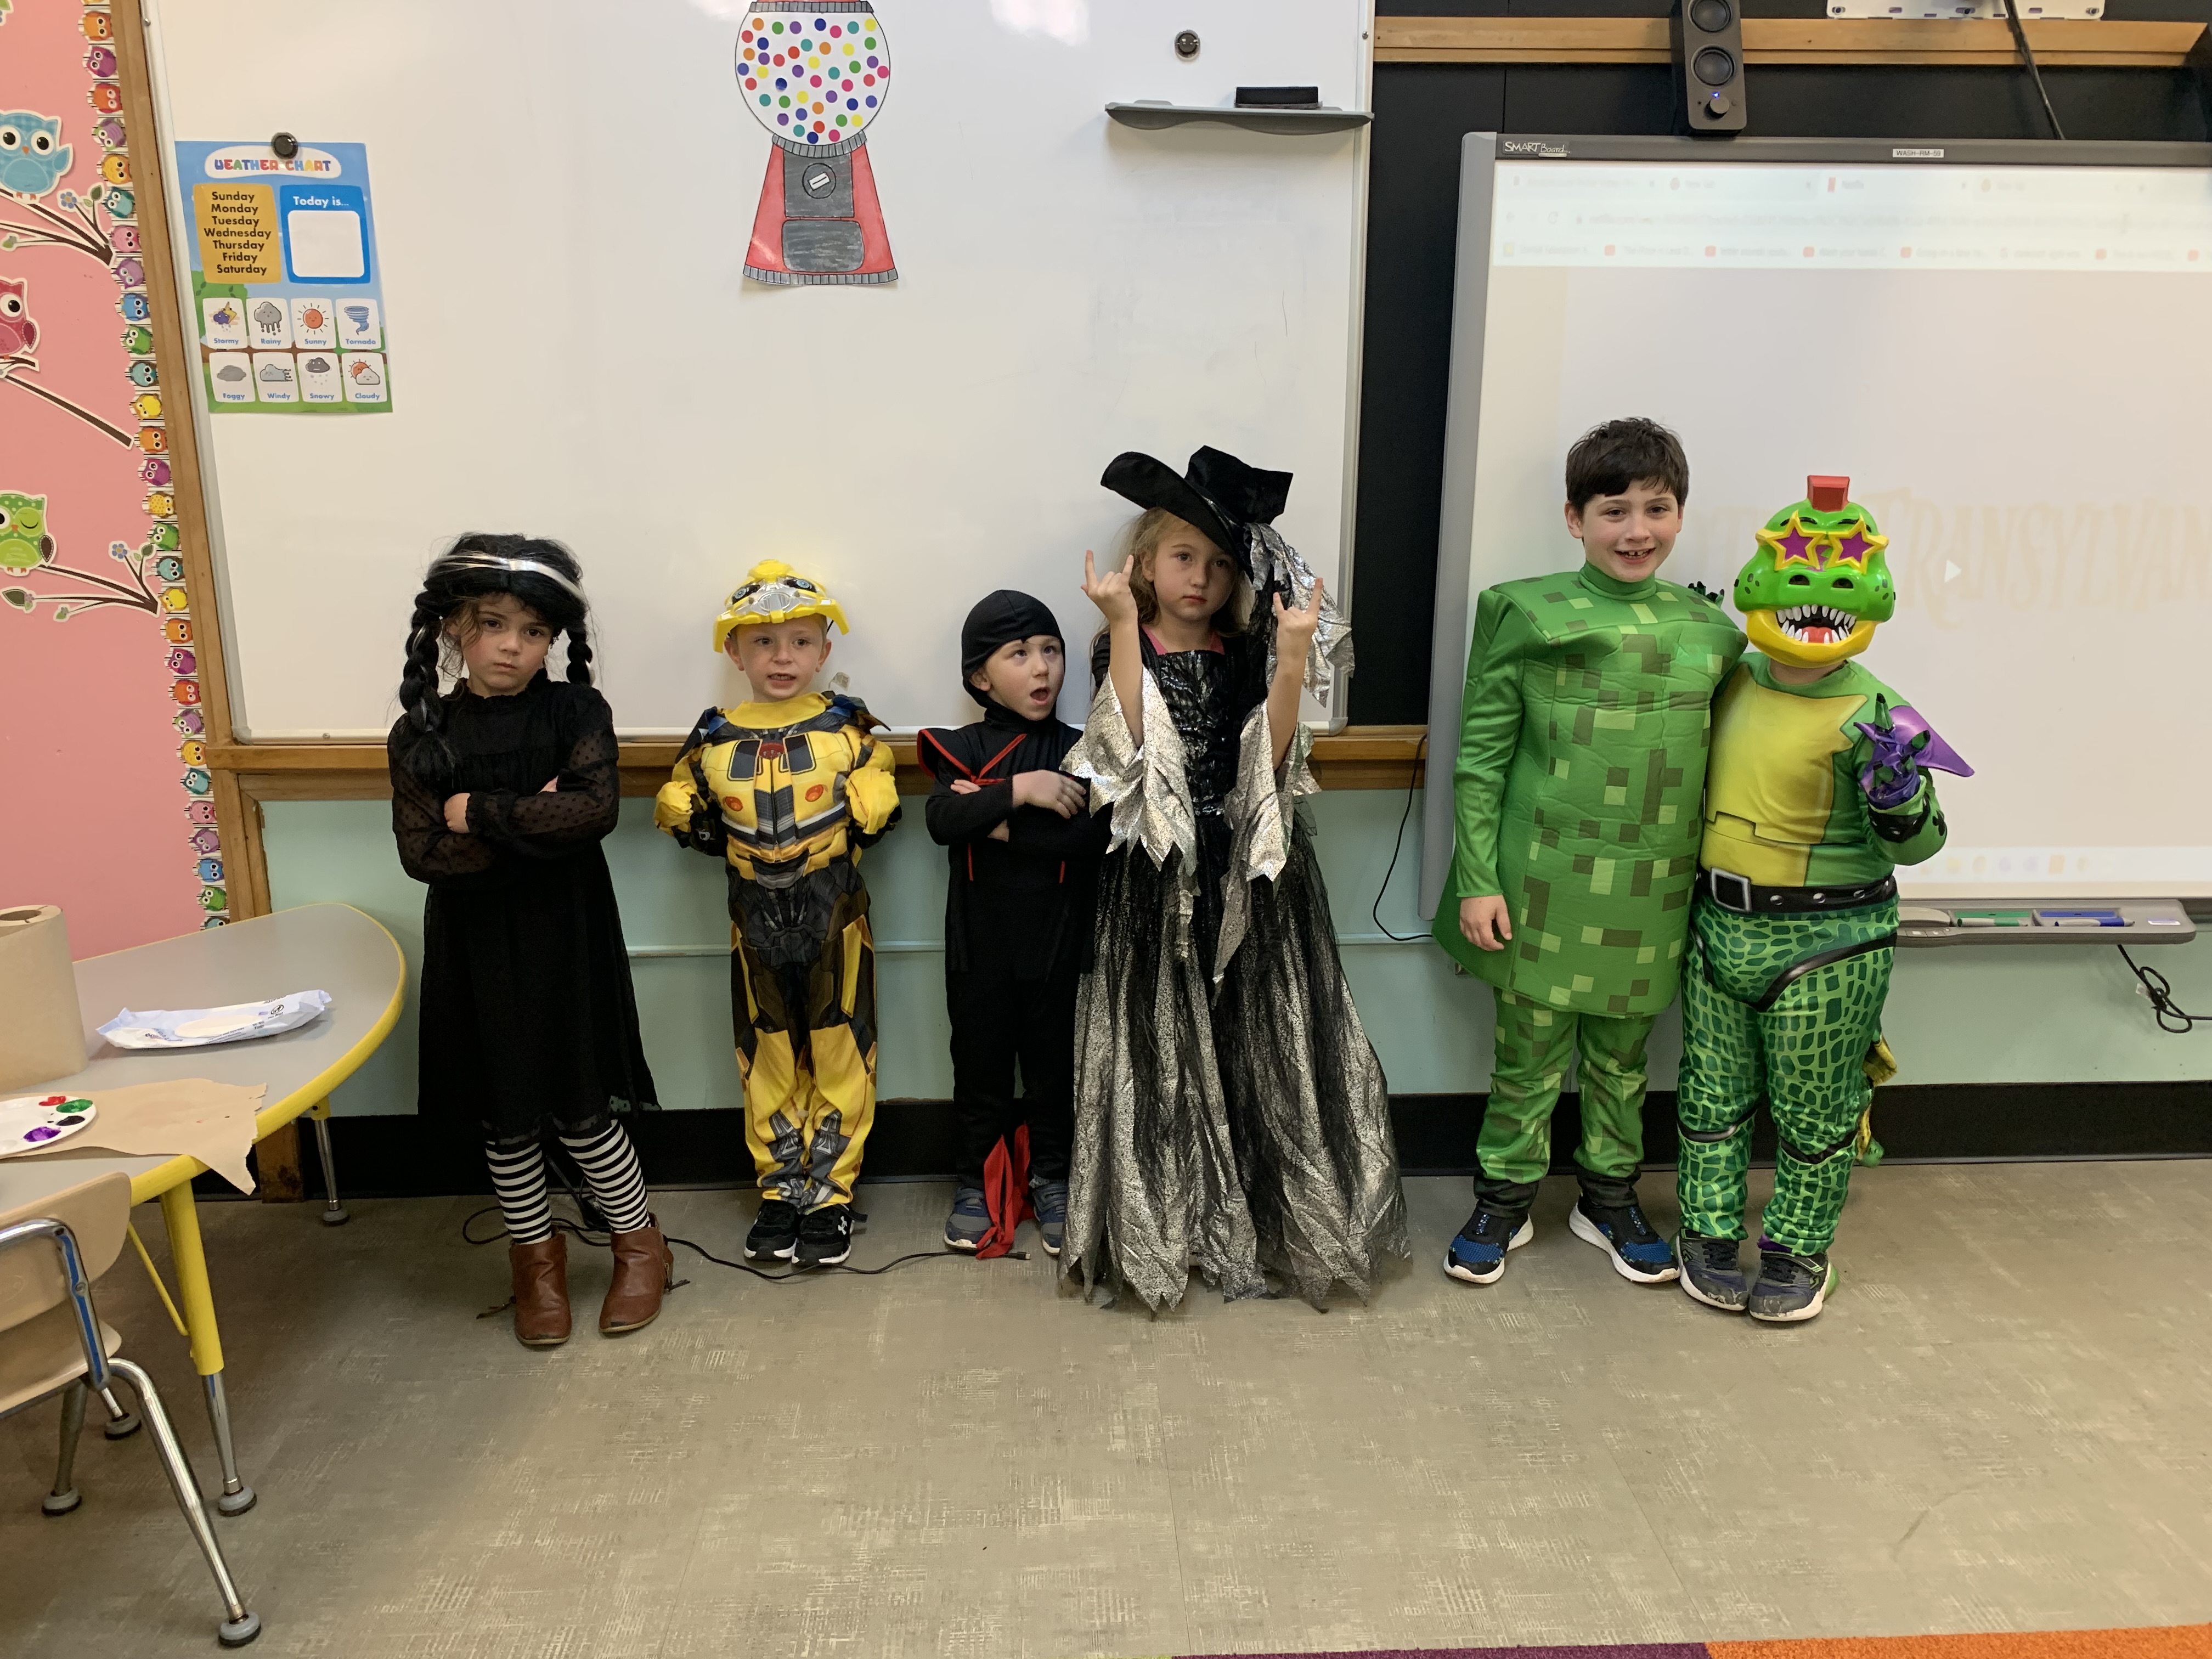 Students smiling for Halloween